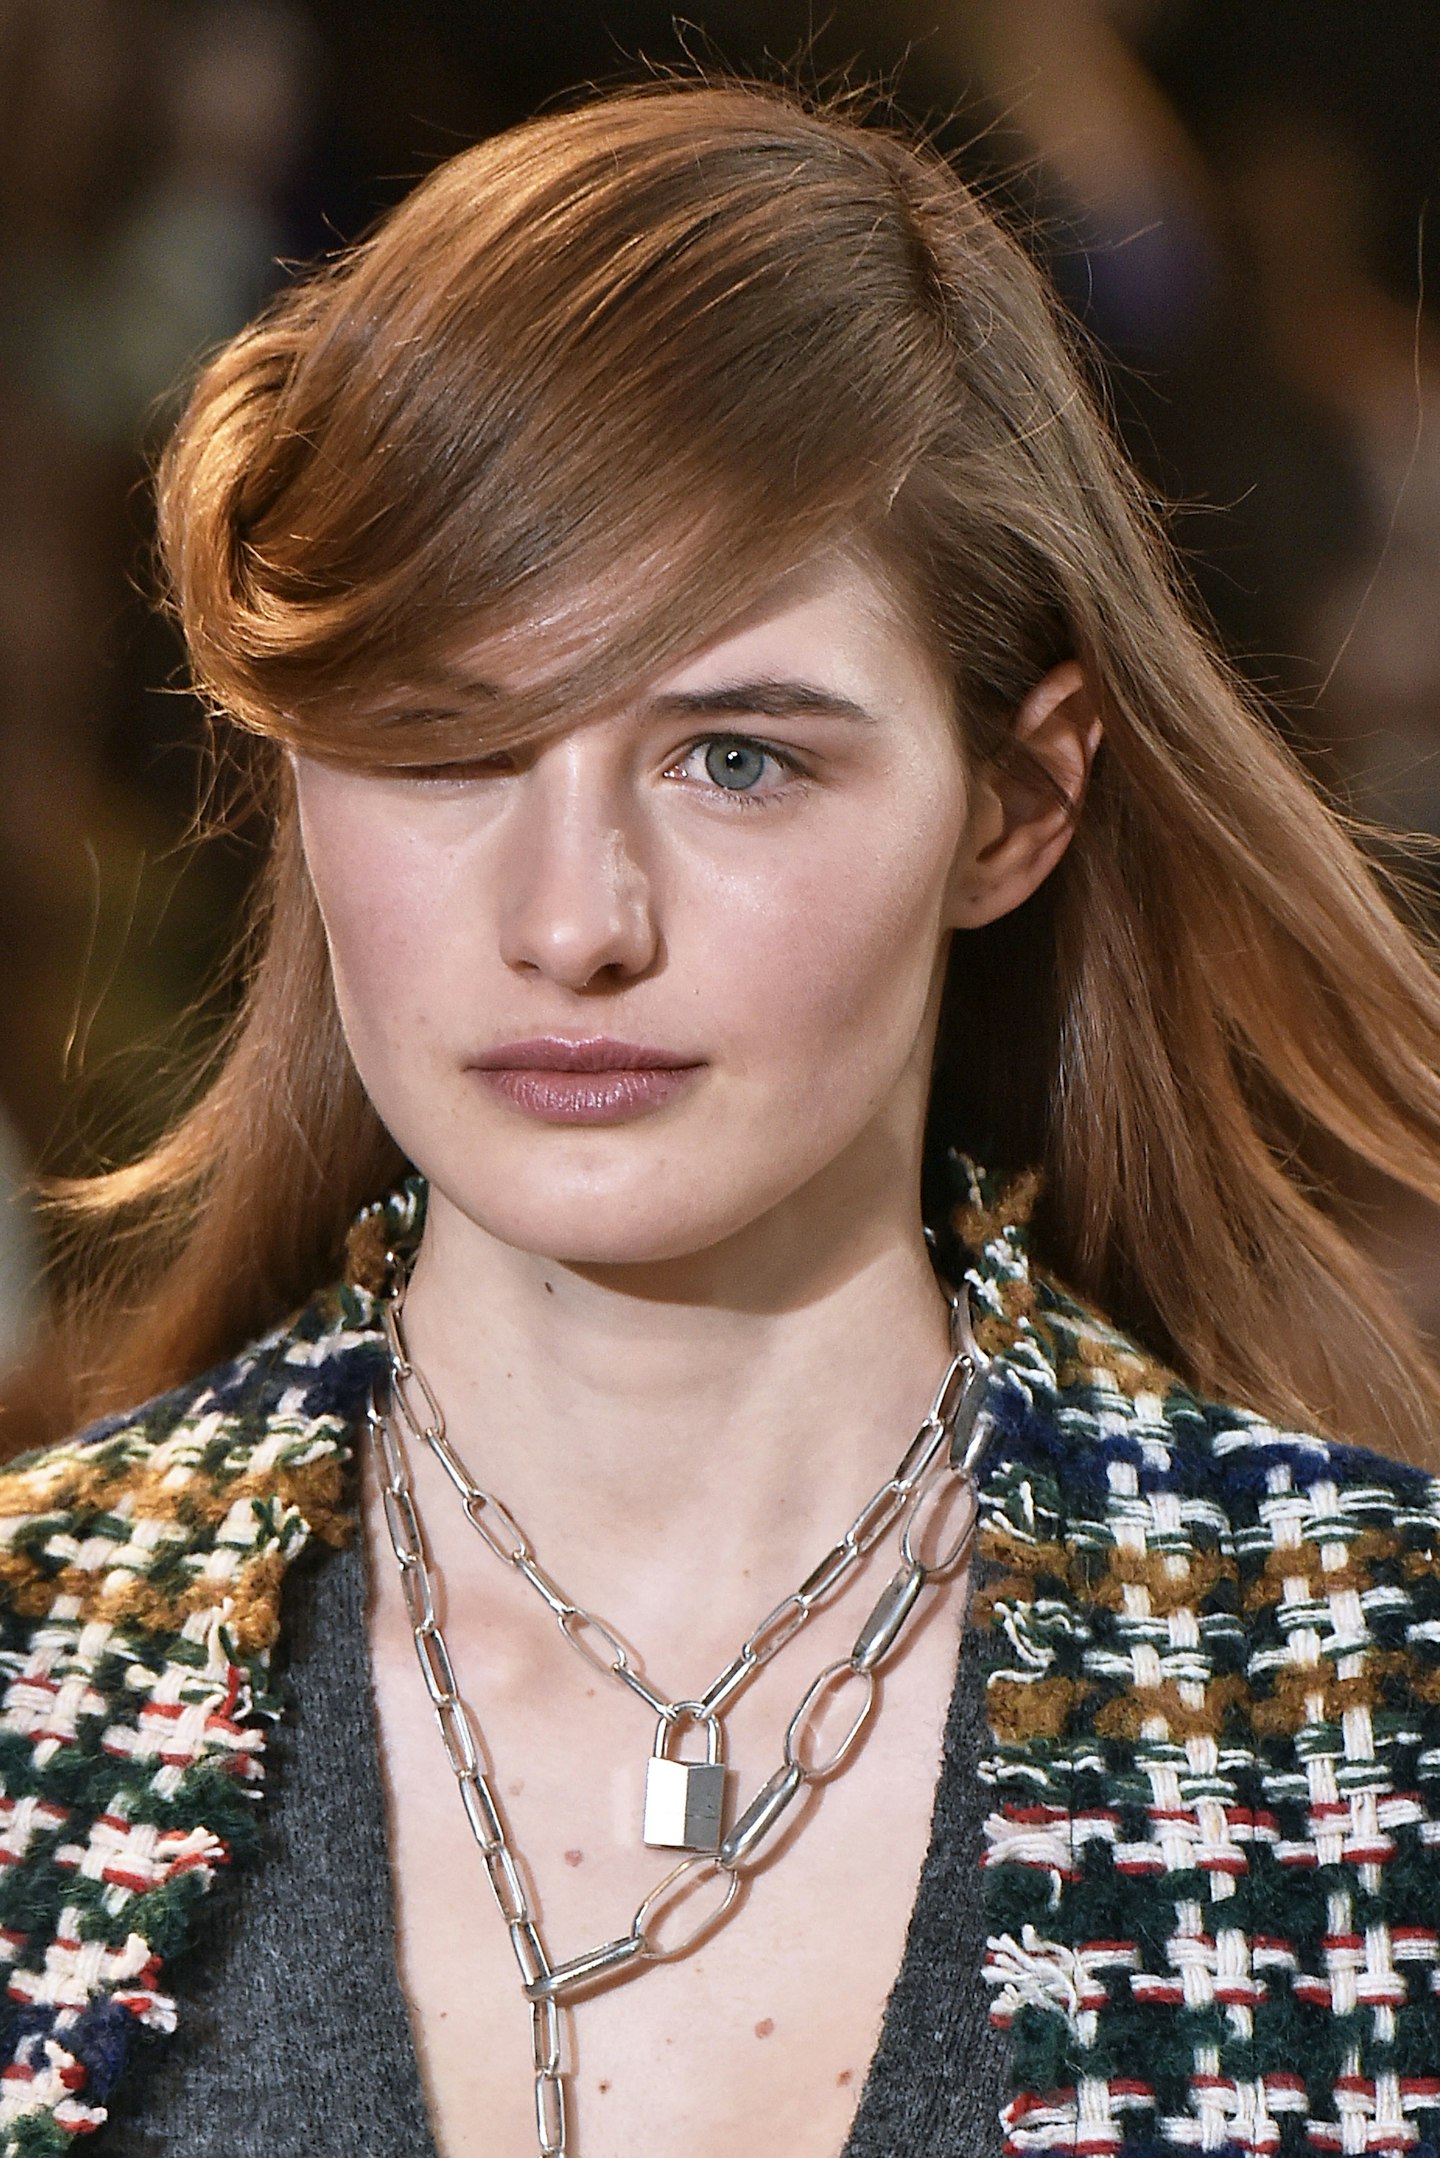 AW16 Hair Trends Catwalk Hairstyle Ideas